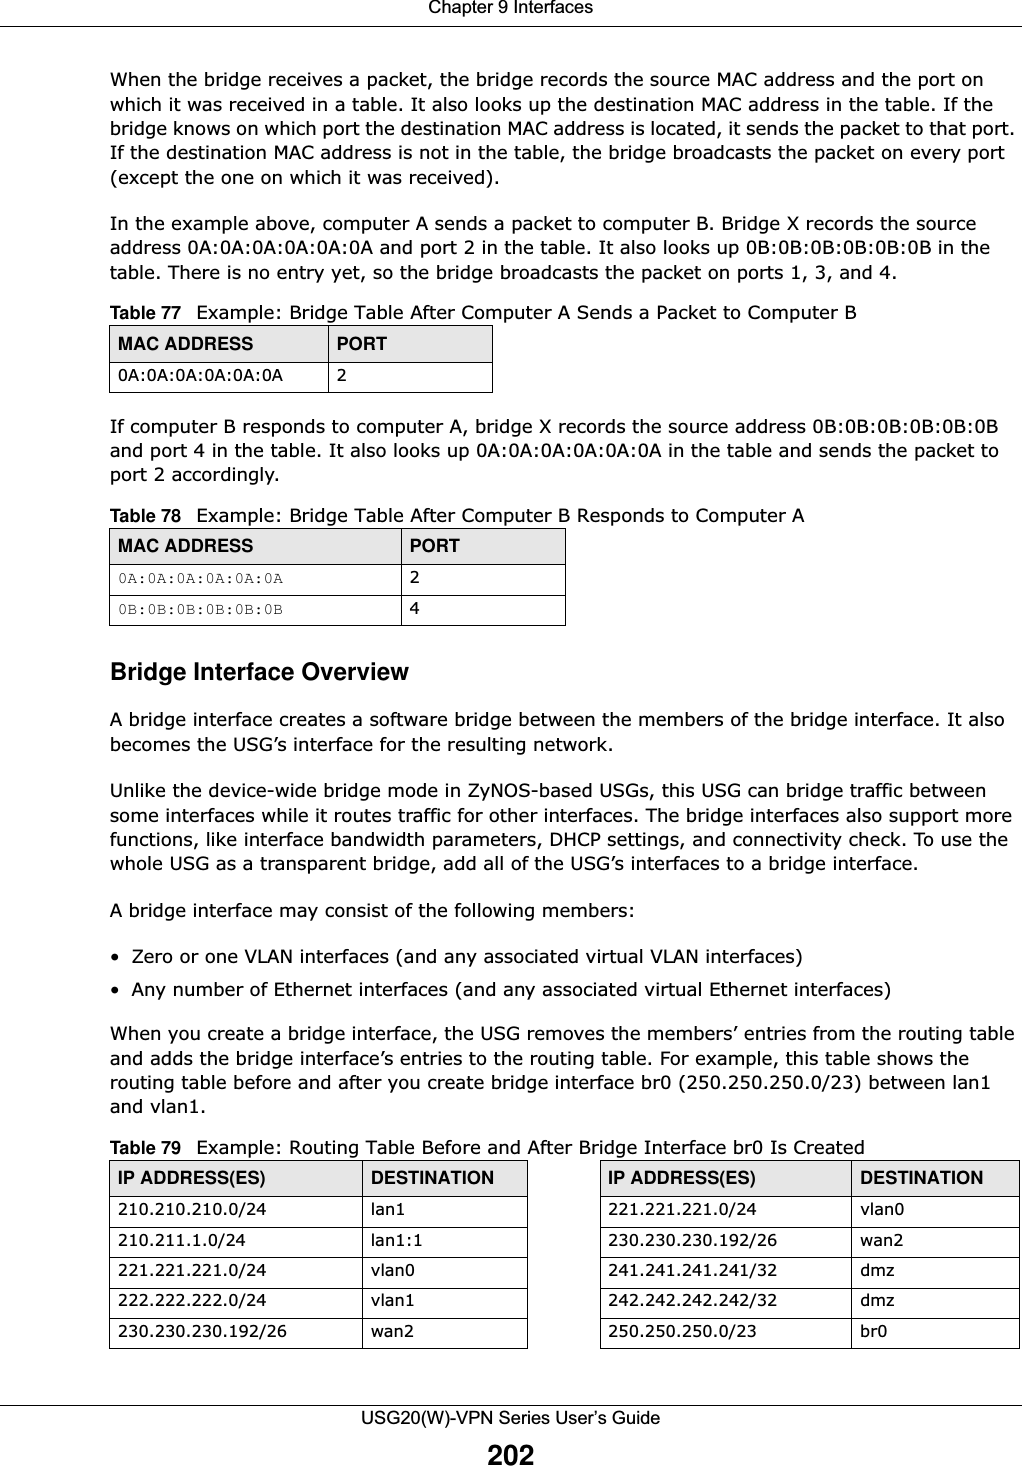 Chapter 9 InterfacesUSG20(W)-VPN Series User’s Guide202When the bridge receives a packet, the bridge records the source MAC address and the port on which it was received in a table. It also looks up the destination MAC address in the table. If the bridge knows on which port the destination MAC address is located, it sends the packet to that port. If the destination MAC address is not in the table, the bridge broadcasts the packet on every port (except the one on which it was received).In the example above, computer A sends a packet to computer B. Bridge X records the source address 0A:0A:0A:0A:0A:0A and port 2 in the table. It also looks up 0B:0B:0B:0B:0B:0B in the table. There is no entry yet, so the bridge broadcasts the packet on ports 1, 3, and 4.If computer B responds to computer A, bridge X records the source address 0B:0B:0B:0B:0B:0B and port 4 in the table. It also looks up 0A:0A:0A:0A:0A:0A in the table and sends the packet to port 2 accordingly.Bridge Interface OverviewA bridge interface creates a software bridge between the members of the bridge interface. It also becomes the USG’s interface for the resulting network.Unlike the device-wide bridge mode in ZyNOS-based USGs, this USG can bridge traffic between some interfaces while it routes traffic for other interfaces. The bridge interfaces also support more functions, like interface bandwidth parameters, DHCP settings, and connectivity check. To use the whole USG as a transparent bridge, add all of the USG’s interfaces to a bridge interface. A bridge interface may consist of the following members:• Zero or one VLAN interfaces (and any associated virtual VLAN interfaces)• Any number of Ethernet interfaces (and any associated virtual Ethernet interfaces)When you create a bridge interface, the USG removes the members’ entries from the routing table and adds the bridge interface’s entries to the routing table. For example, this table shows the routing table before and after you create bridge interface br0 (250.250.250.0/23) between lan1 and vlan1. Table 77   Example: Bridge Table After Computer A Sends a Packet to Computer BMAC ADDRESS PORT0A:0A:0A:0A:0A:0A 2Table 78   Example: Bridge Table After Computer B Responds to Computer AMAC ADDRESS PORT0A:0A:0A:0A:0A:0A 20B:0B:0B:0B:0B:0B 4Table 79   Example: Routing Table Before and After Bridge Interface br0 Is CreatedIP ADDRESS(ES) DESTINATION IP ADDRESS(ES) DESTINATION210.210.210.0/24 lan1 221.221.221.0/24 vlan0210.211.1.0/24 lan1:1 230.230.230.192/26 wan2221.221.221.0/24 vlan0 241.241.241.241/32 dmz222.222.222.0/24 vlan1 242.242.242.242/32 dmz230.230.230.192/26 wan2 250.250.250.0/23 br0